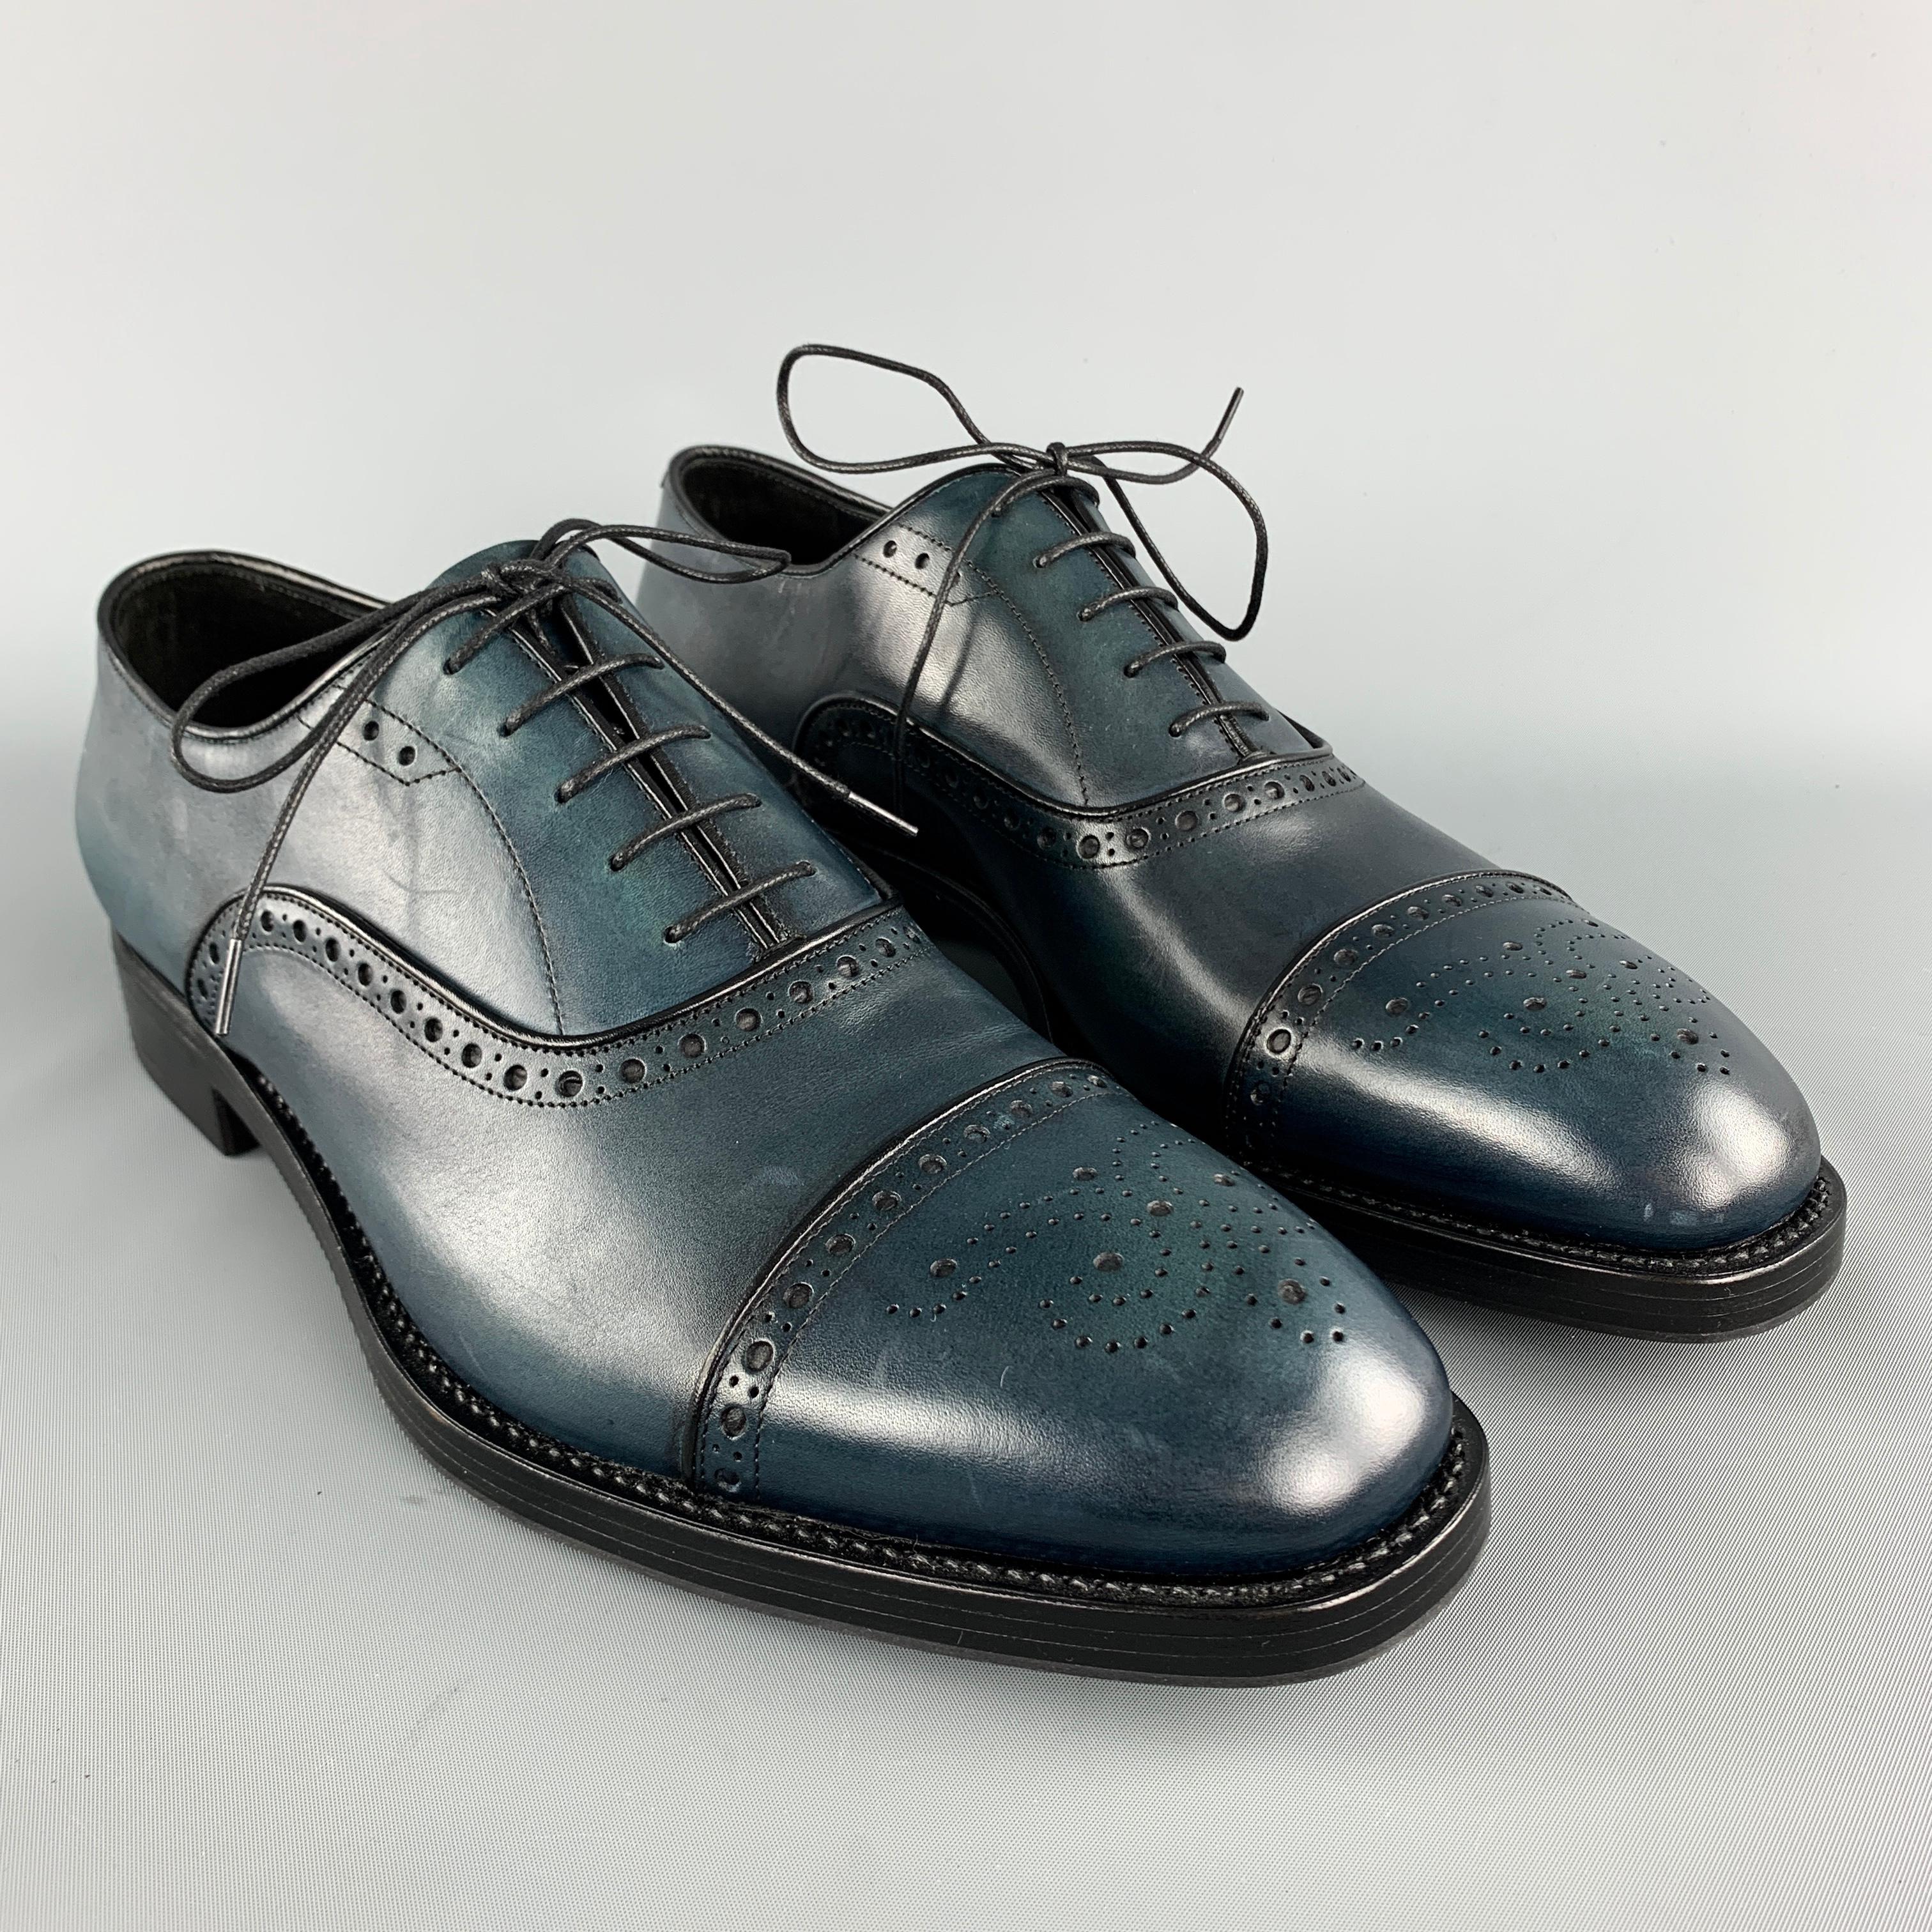 PRADA oxford lace up shoes comes in blue tones in leather material, featuring an antique style, a cap toe, and inner and outsole in leather. Worn once. Made in Italy.

Excellent Pre-Owned Condition.
Marked: UK 10 2EA135  

Outsole: 12.5 x 4.2 in. 